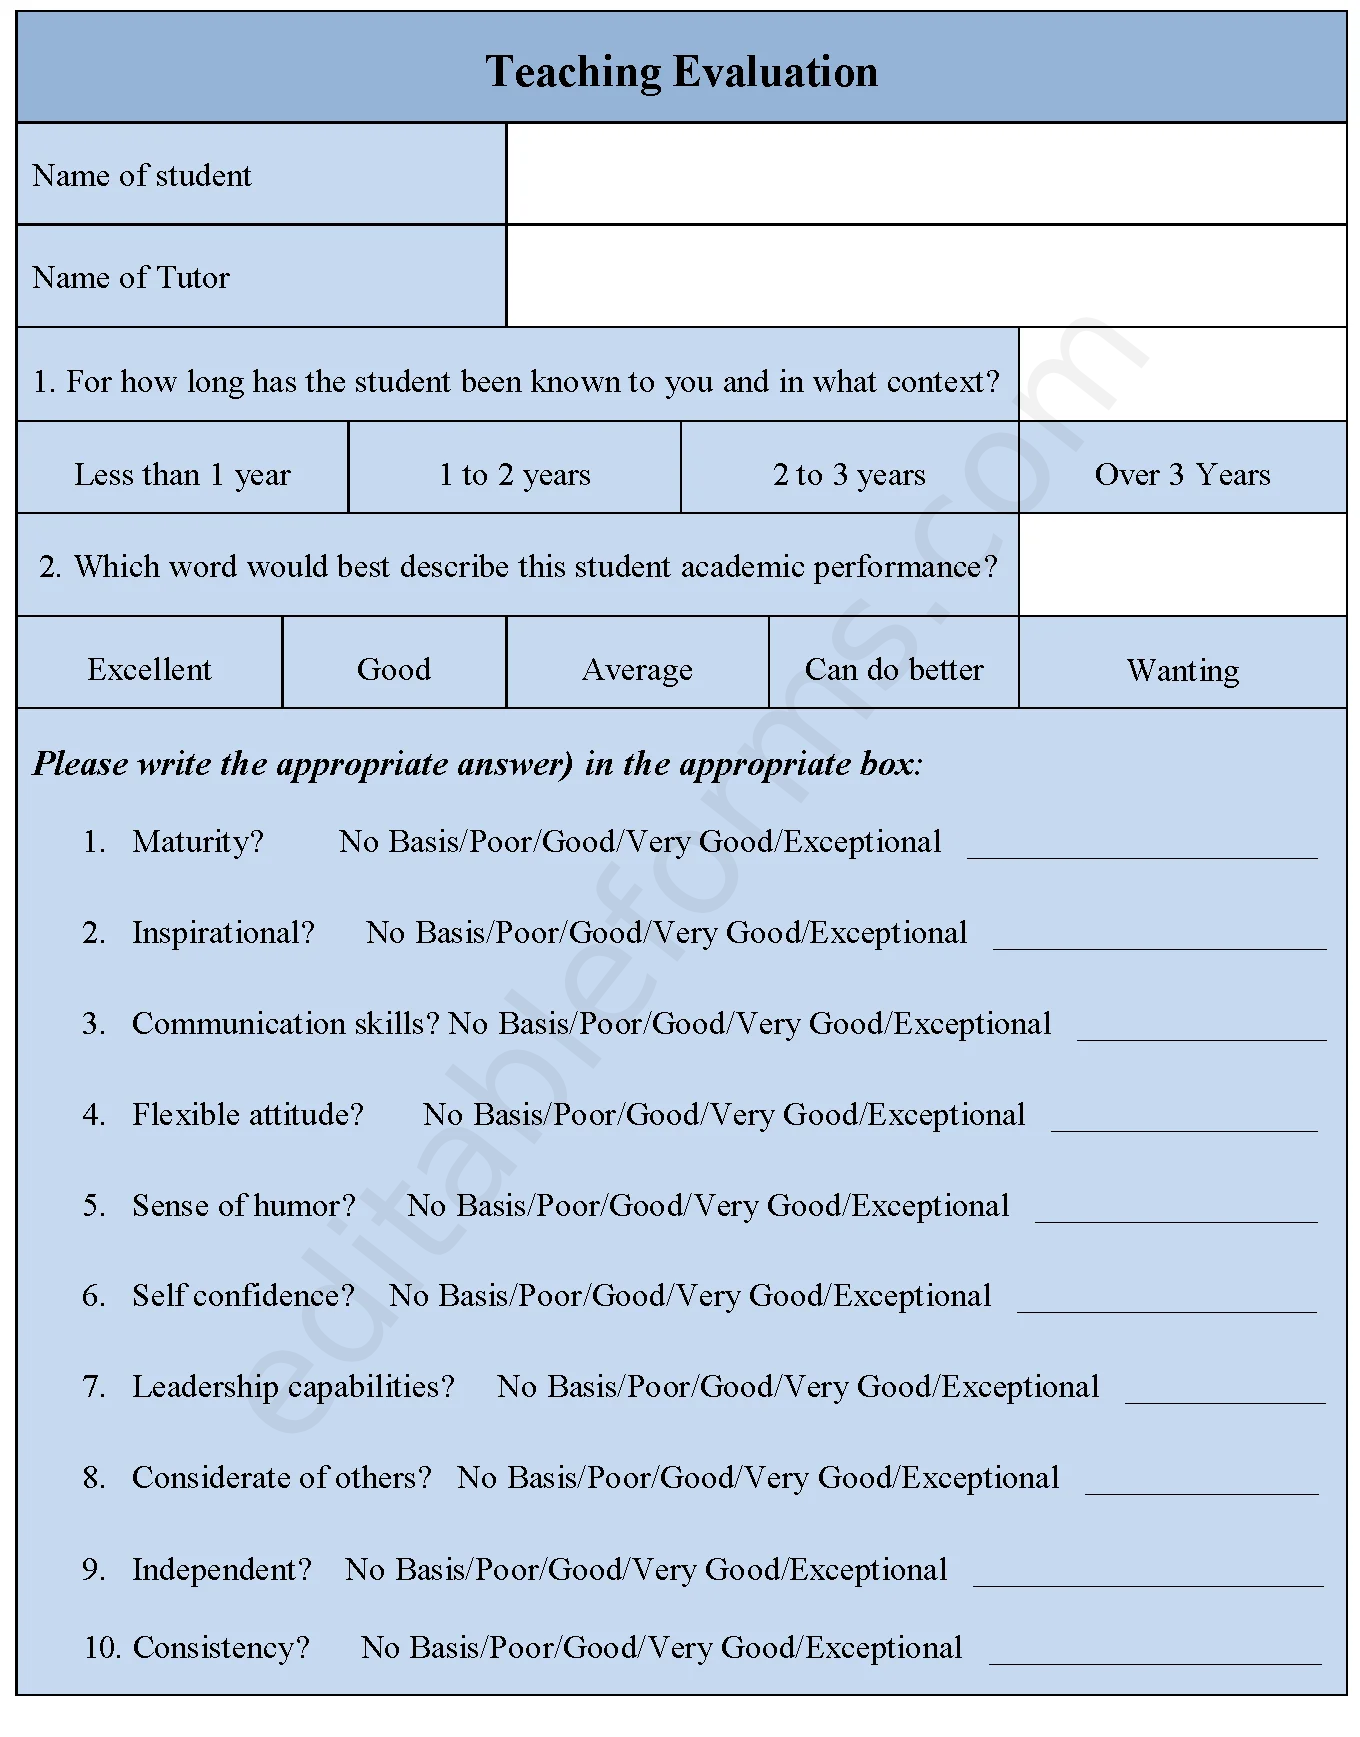 Teaching Evaluation Fillable PDF Template